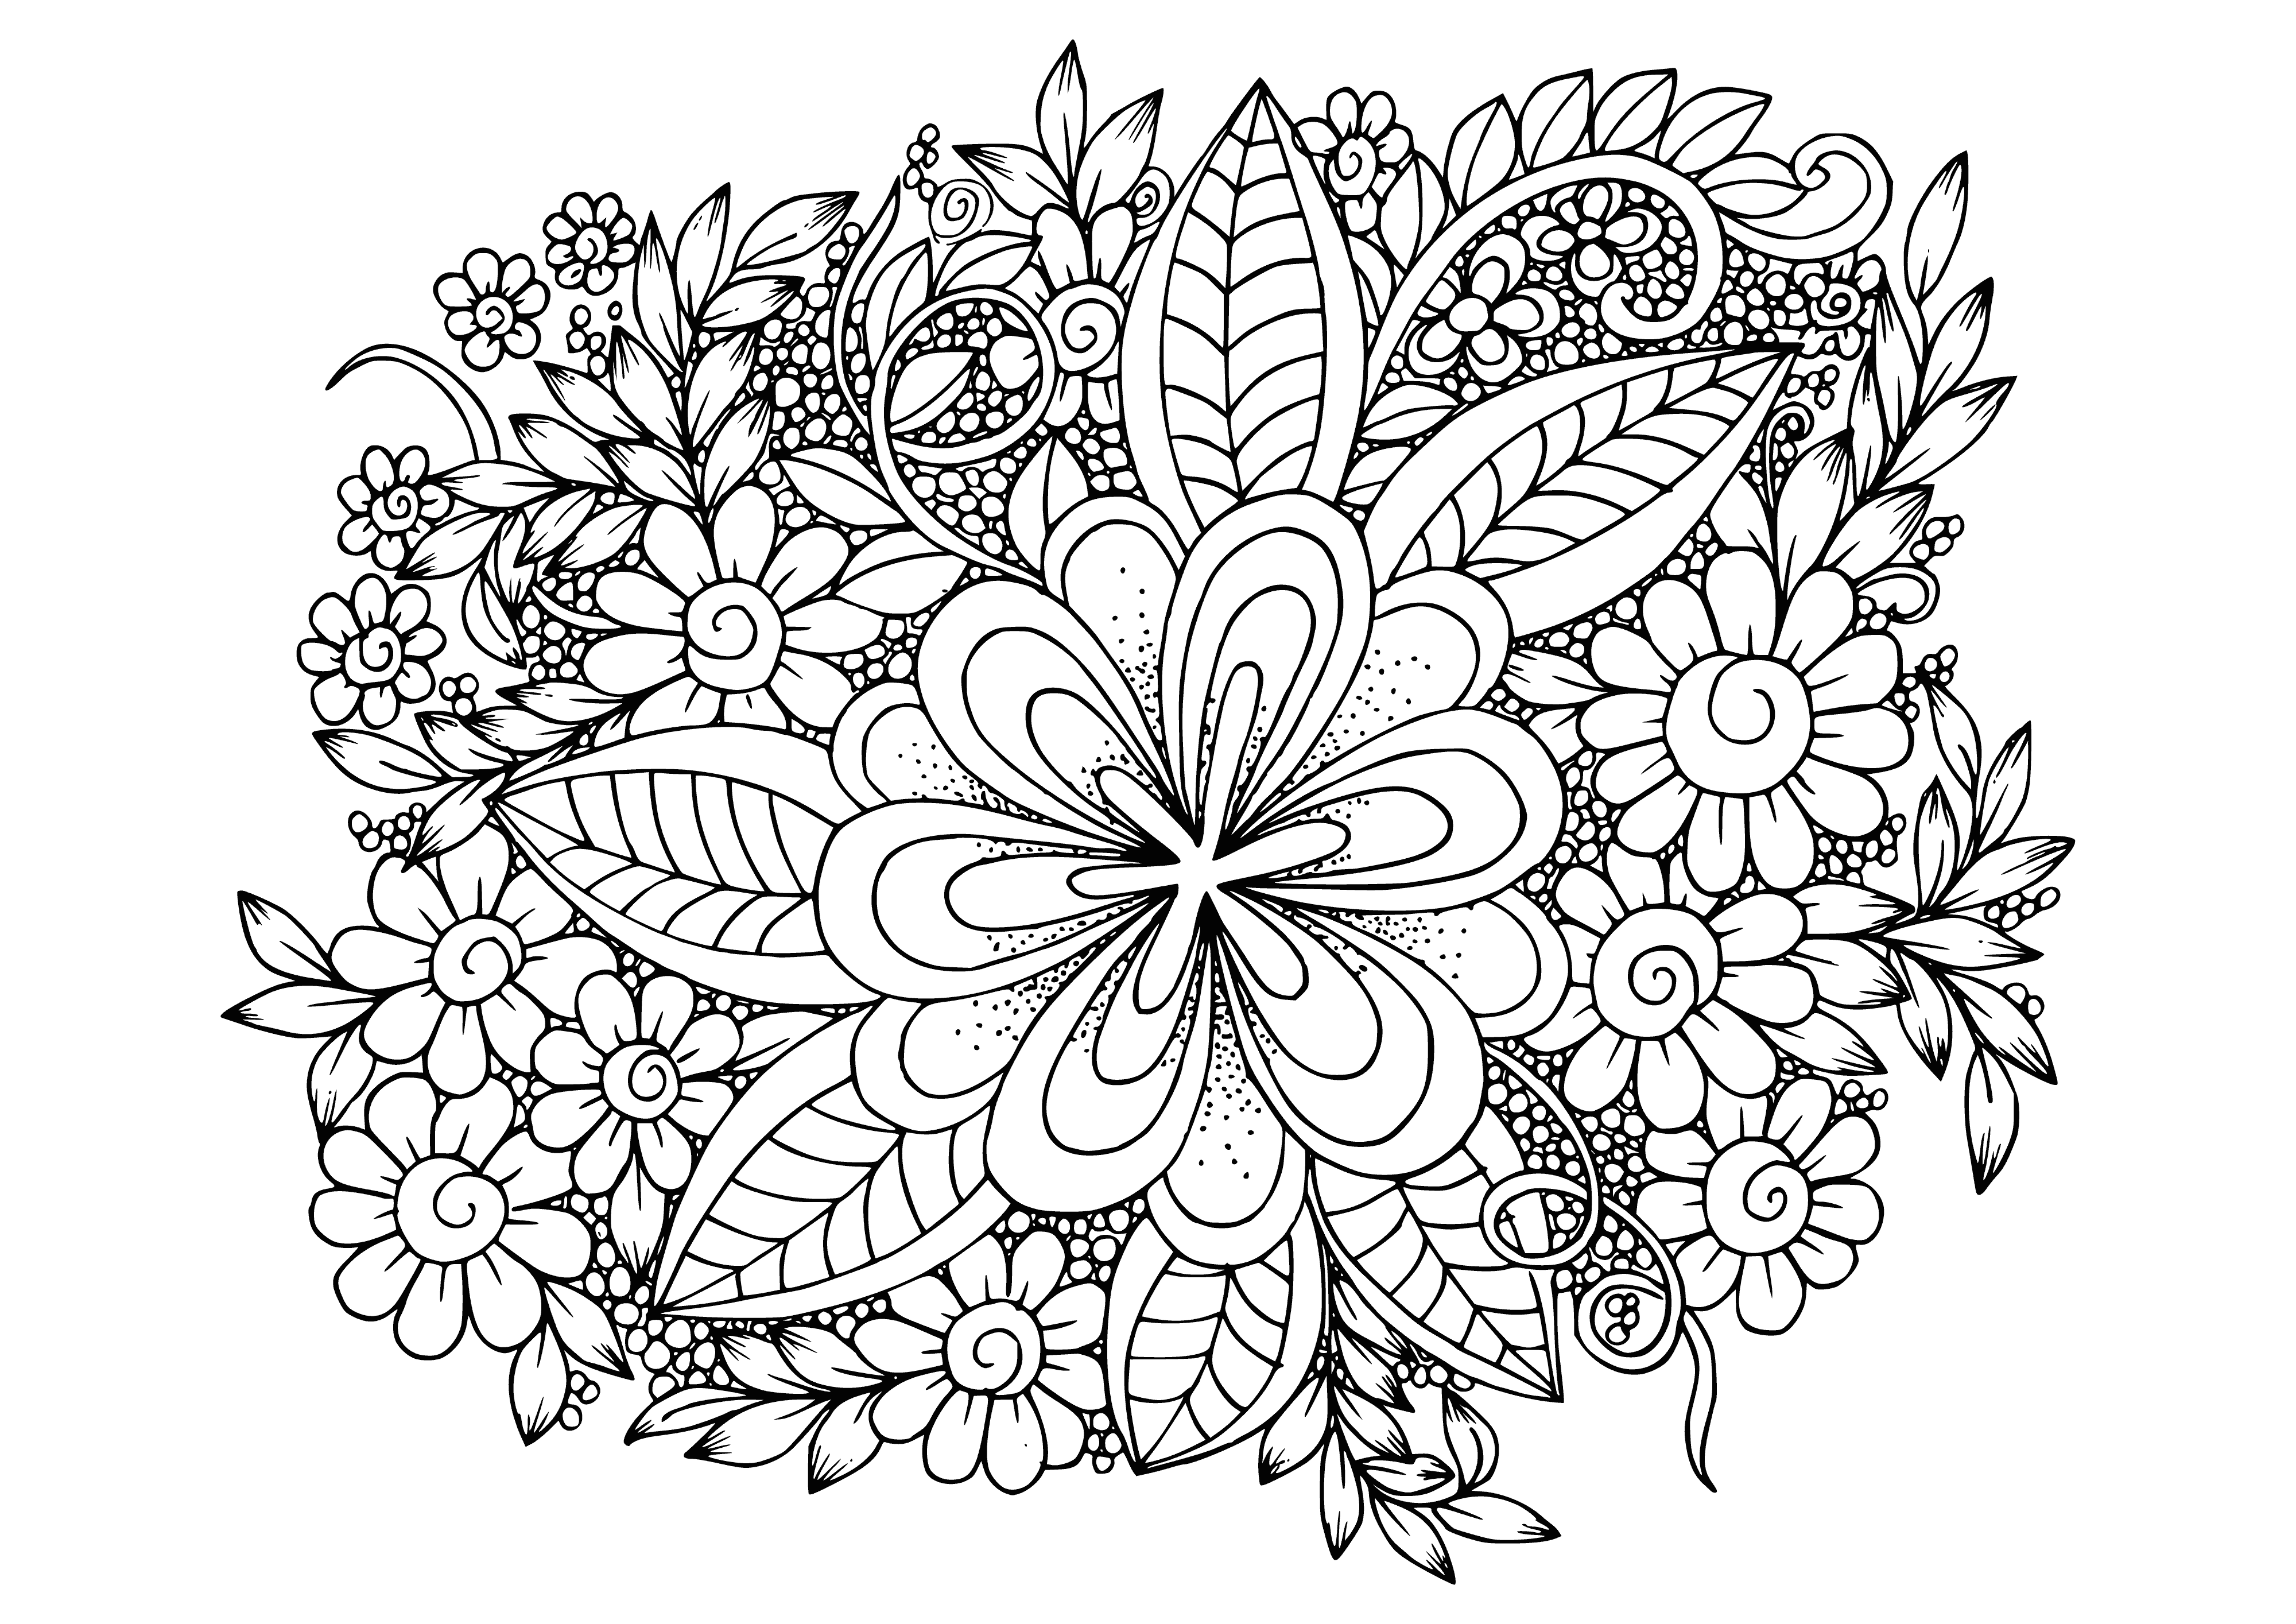 coloring page: Brightly colored flowers: yellow center, red/orange/yellow pedals, green leaves. #flowers #nature